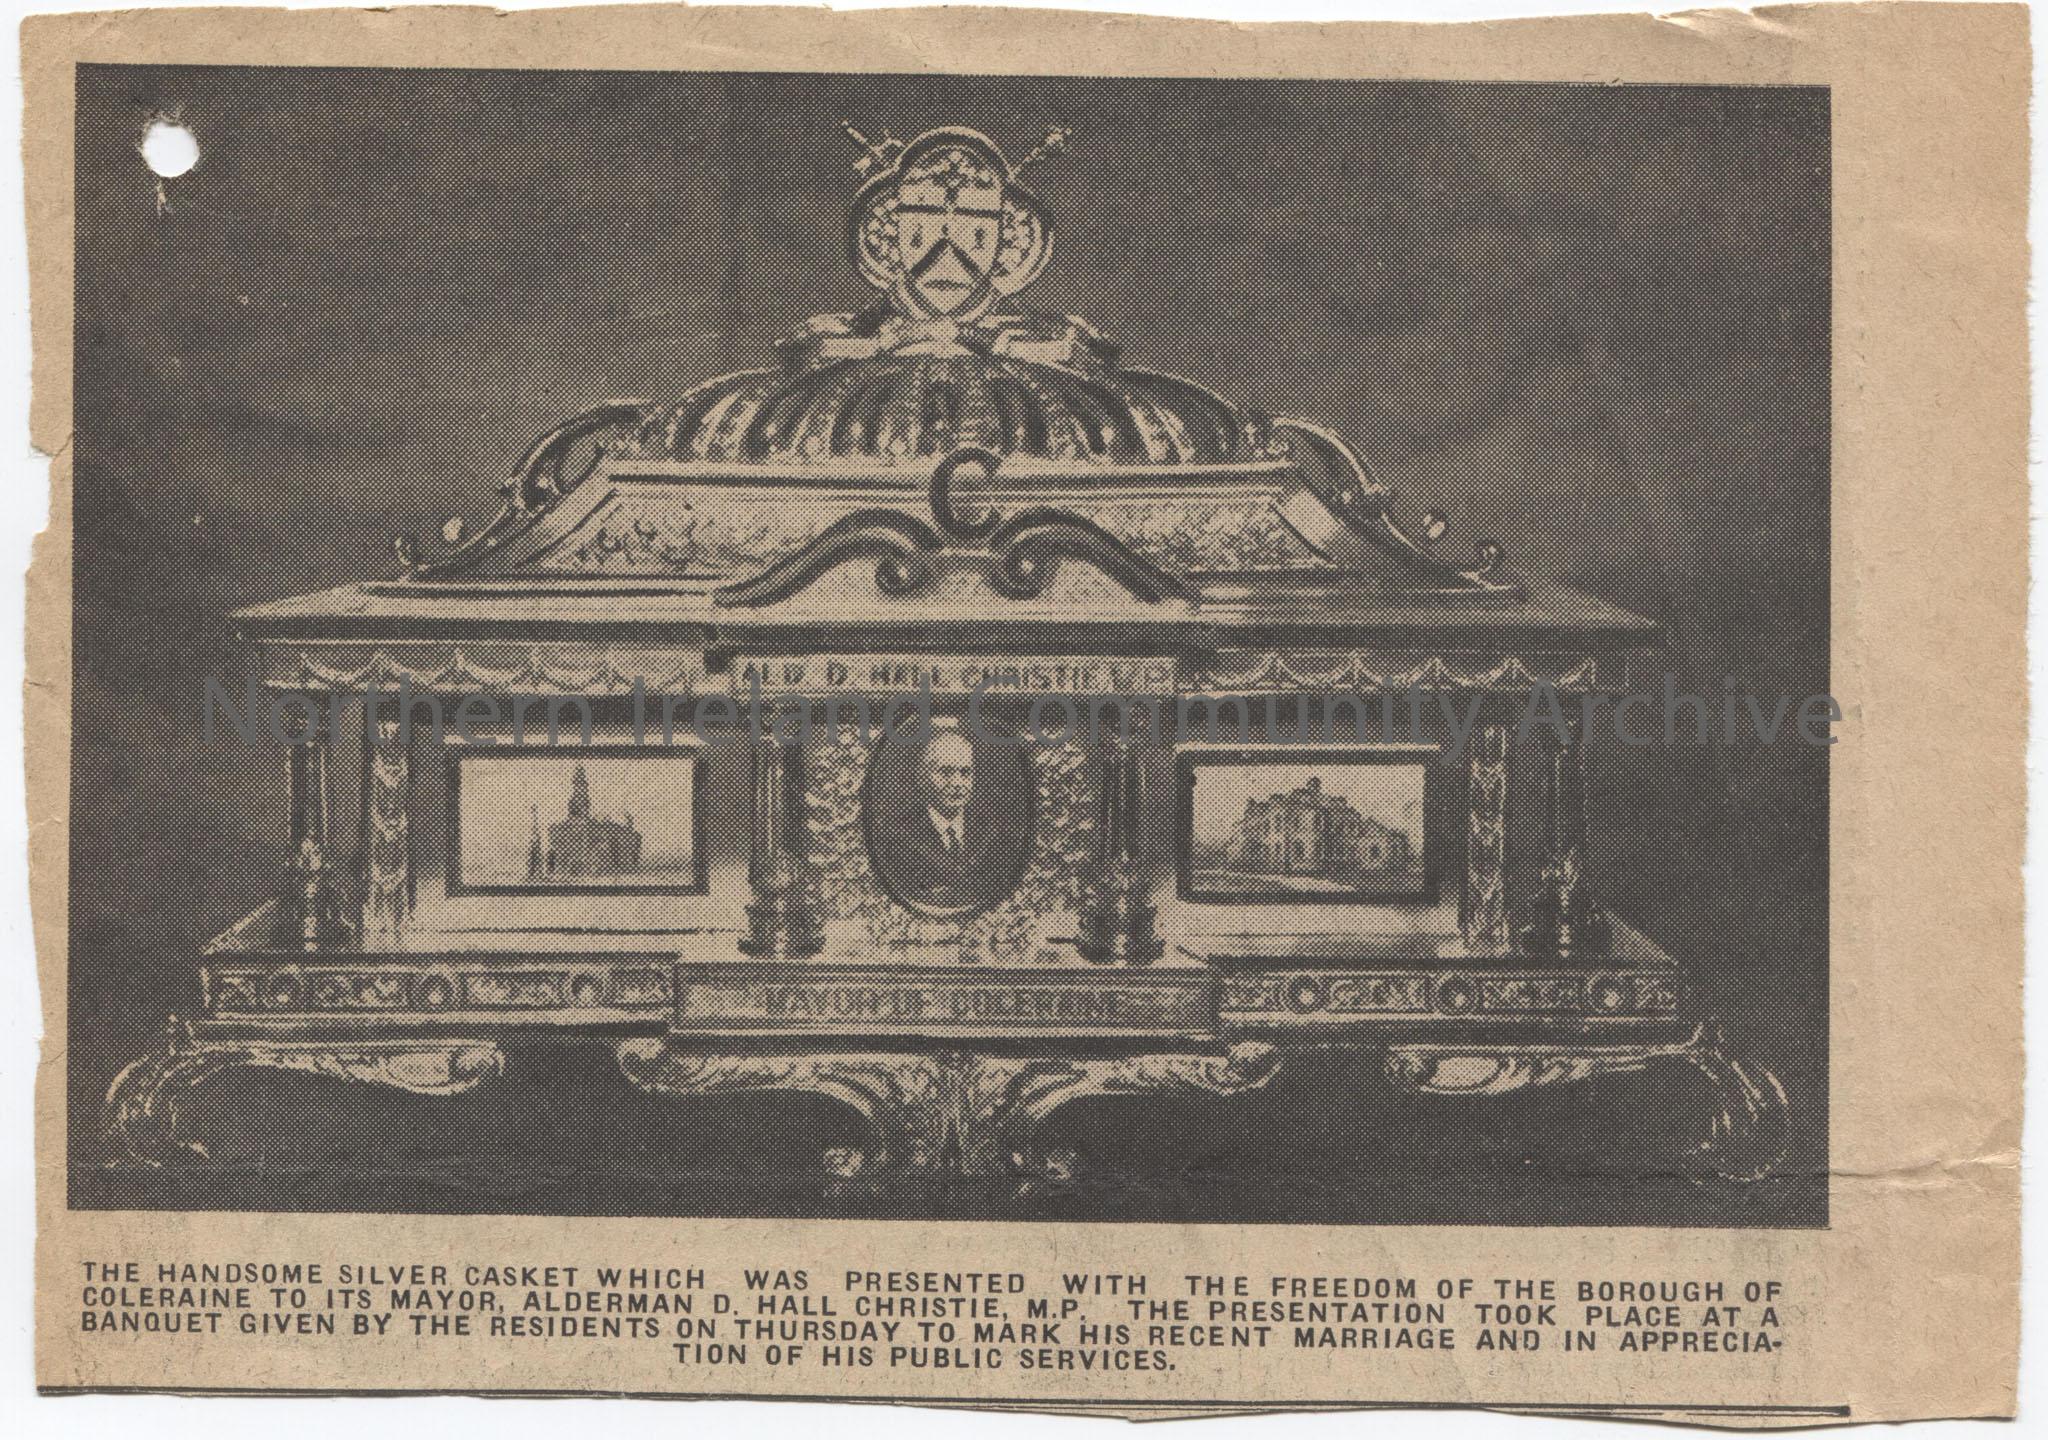 Newspaper clipping – photograph of the silver casket presented with the Freedom of the Borough of Coleraine to Mayor Alderman D. Hall Christie.